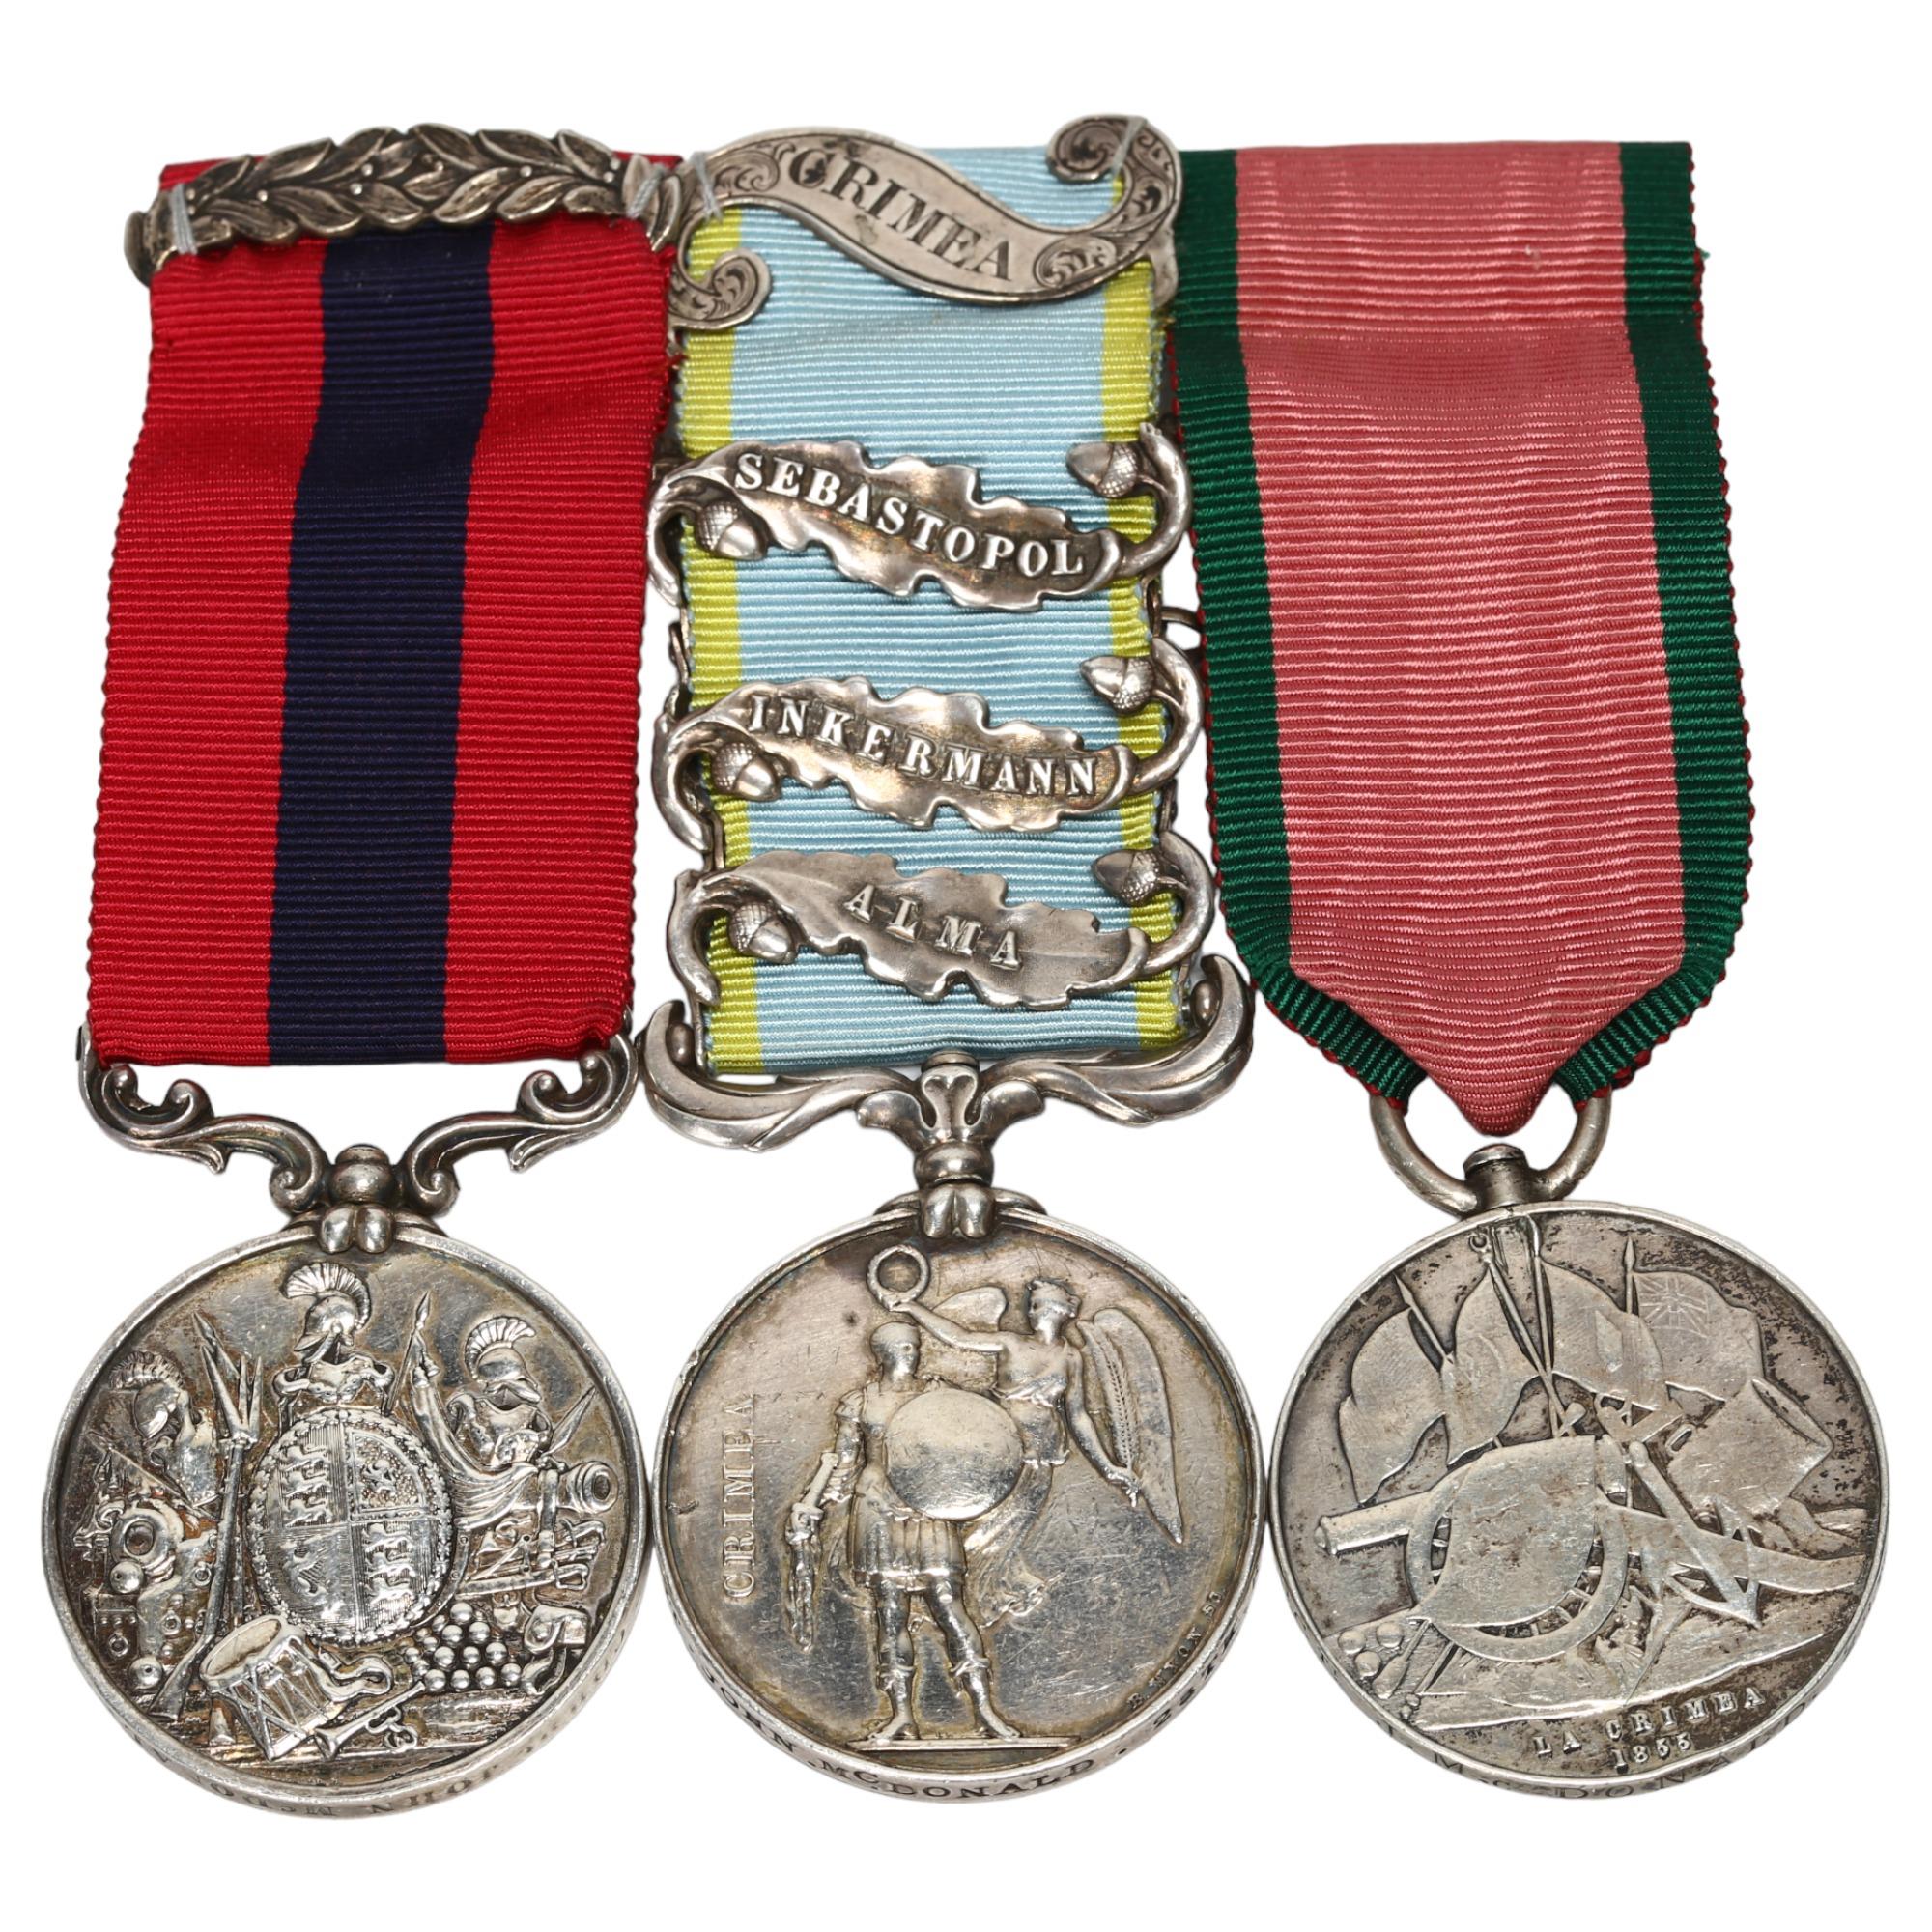 A Distinguished Conduct Medal group awarded to 3033 Col.R Sergt J McDonald 28th Regiment,